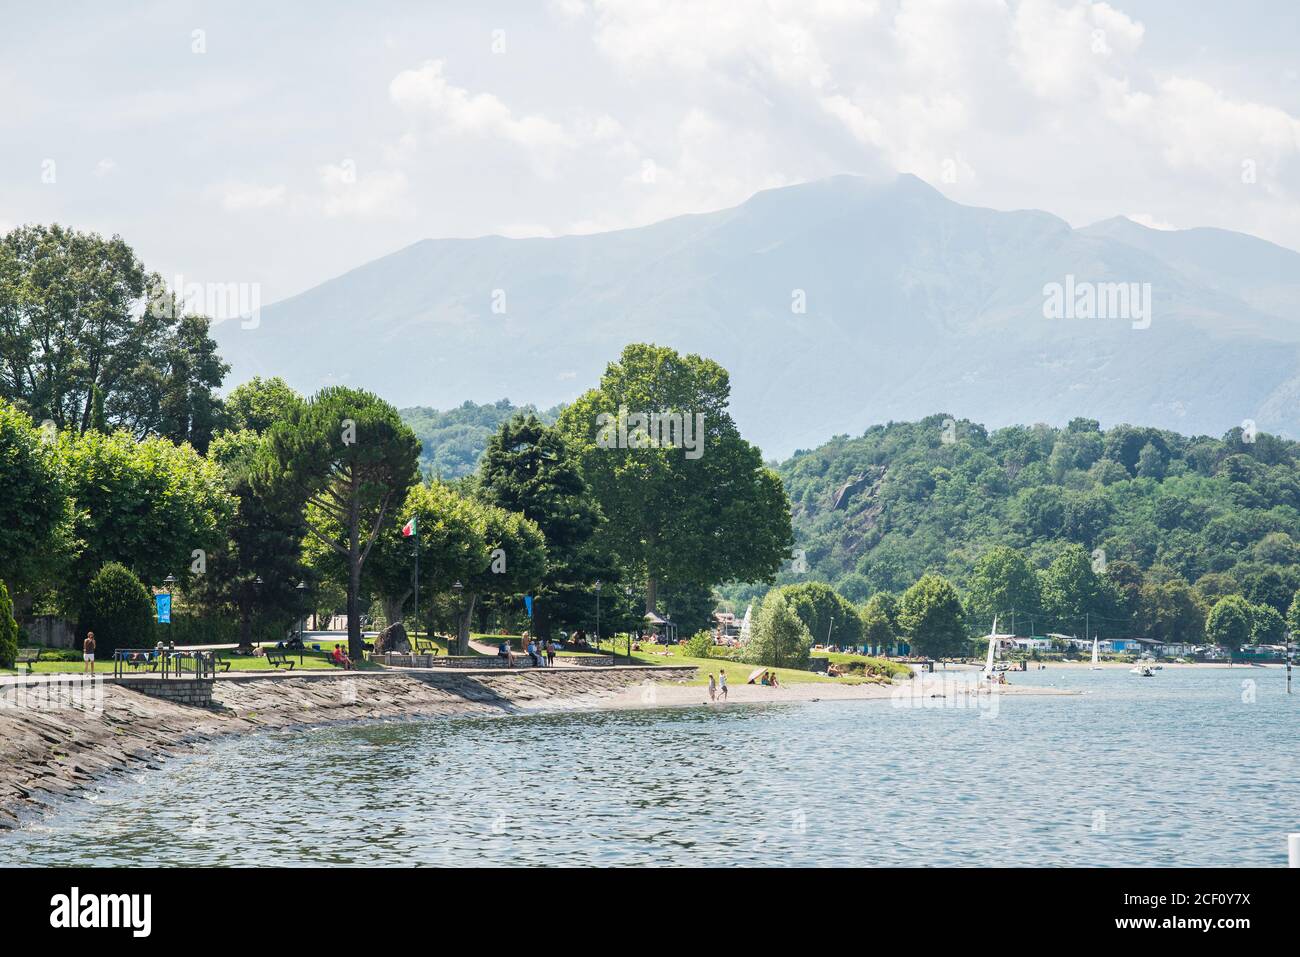 Colico. Lake Como. Italy - July 21, 2019: Embankment of Colico City. Como Lake. Italy. Relaxing Tourists and Camping Territory. Stock Photo